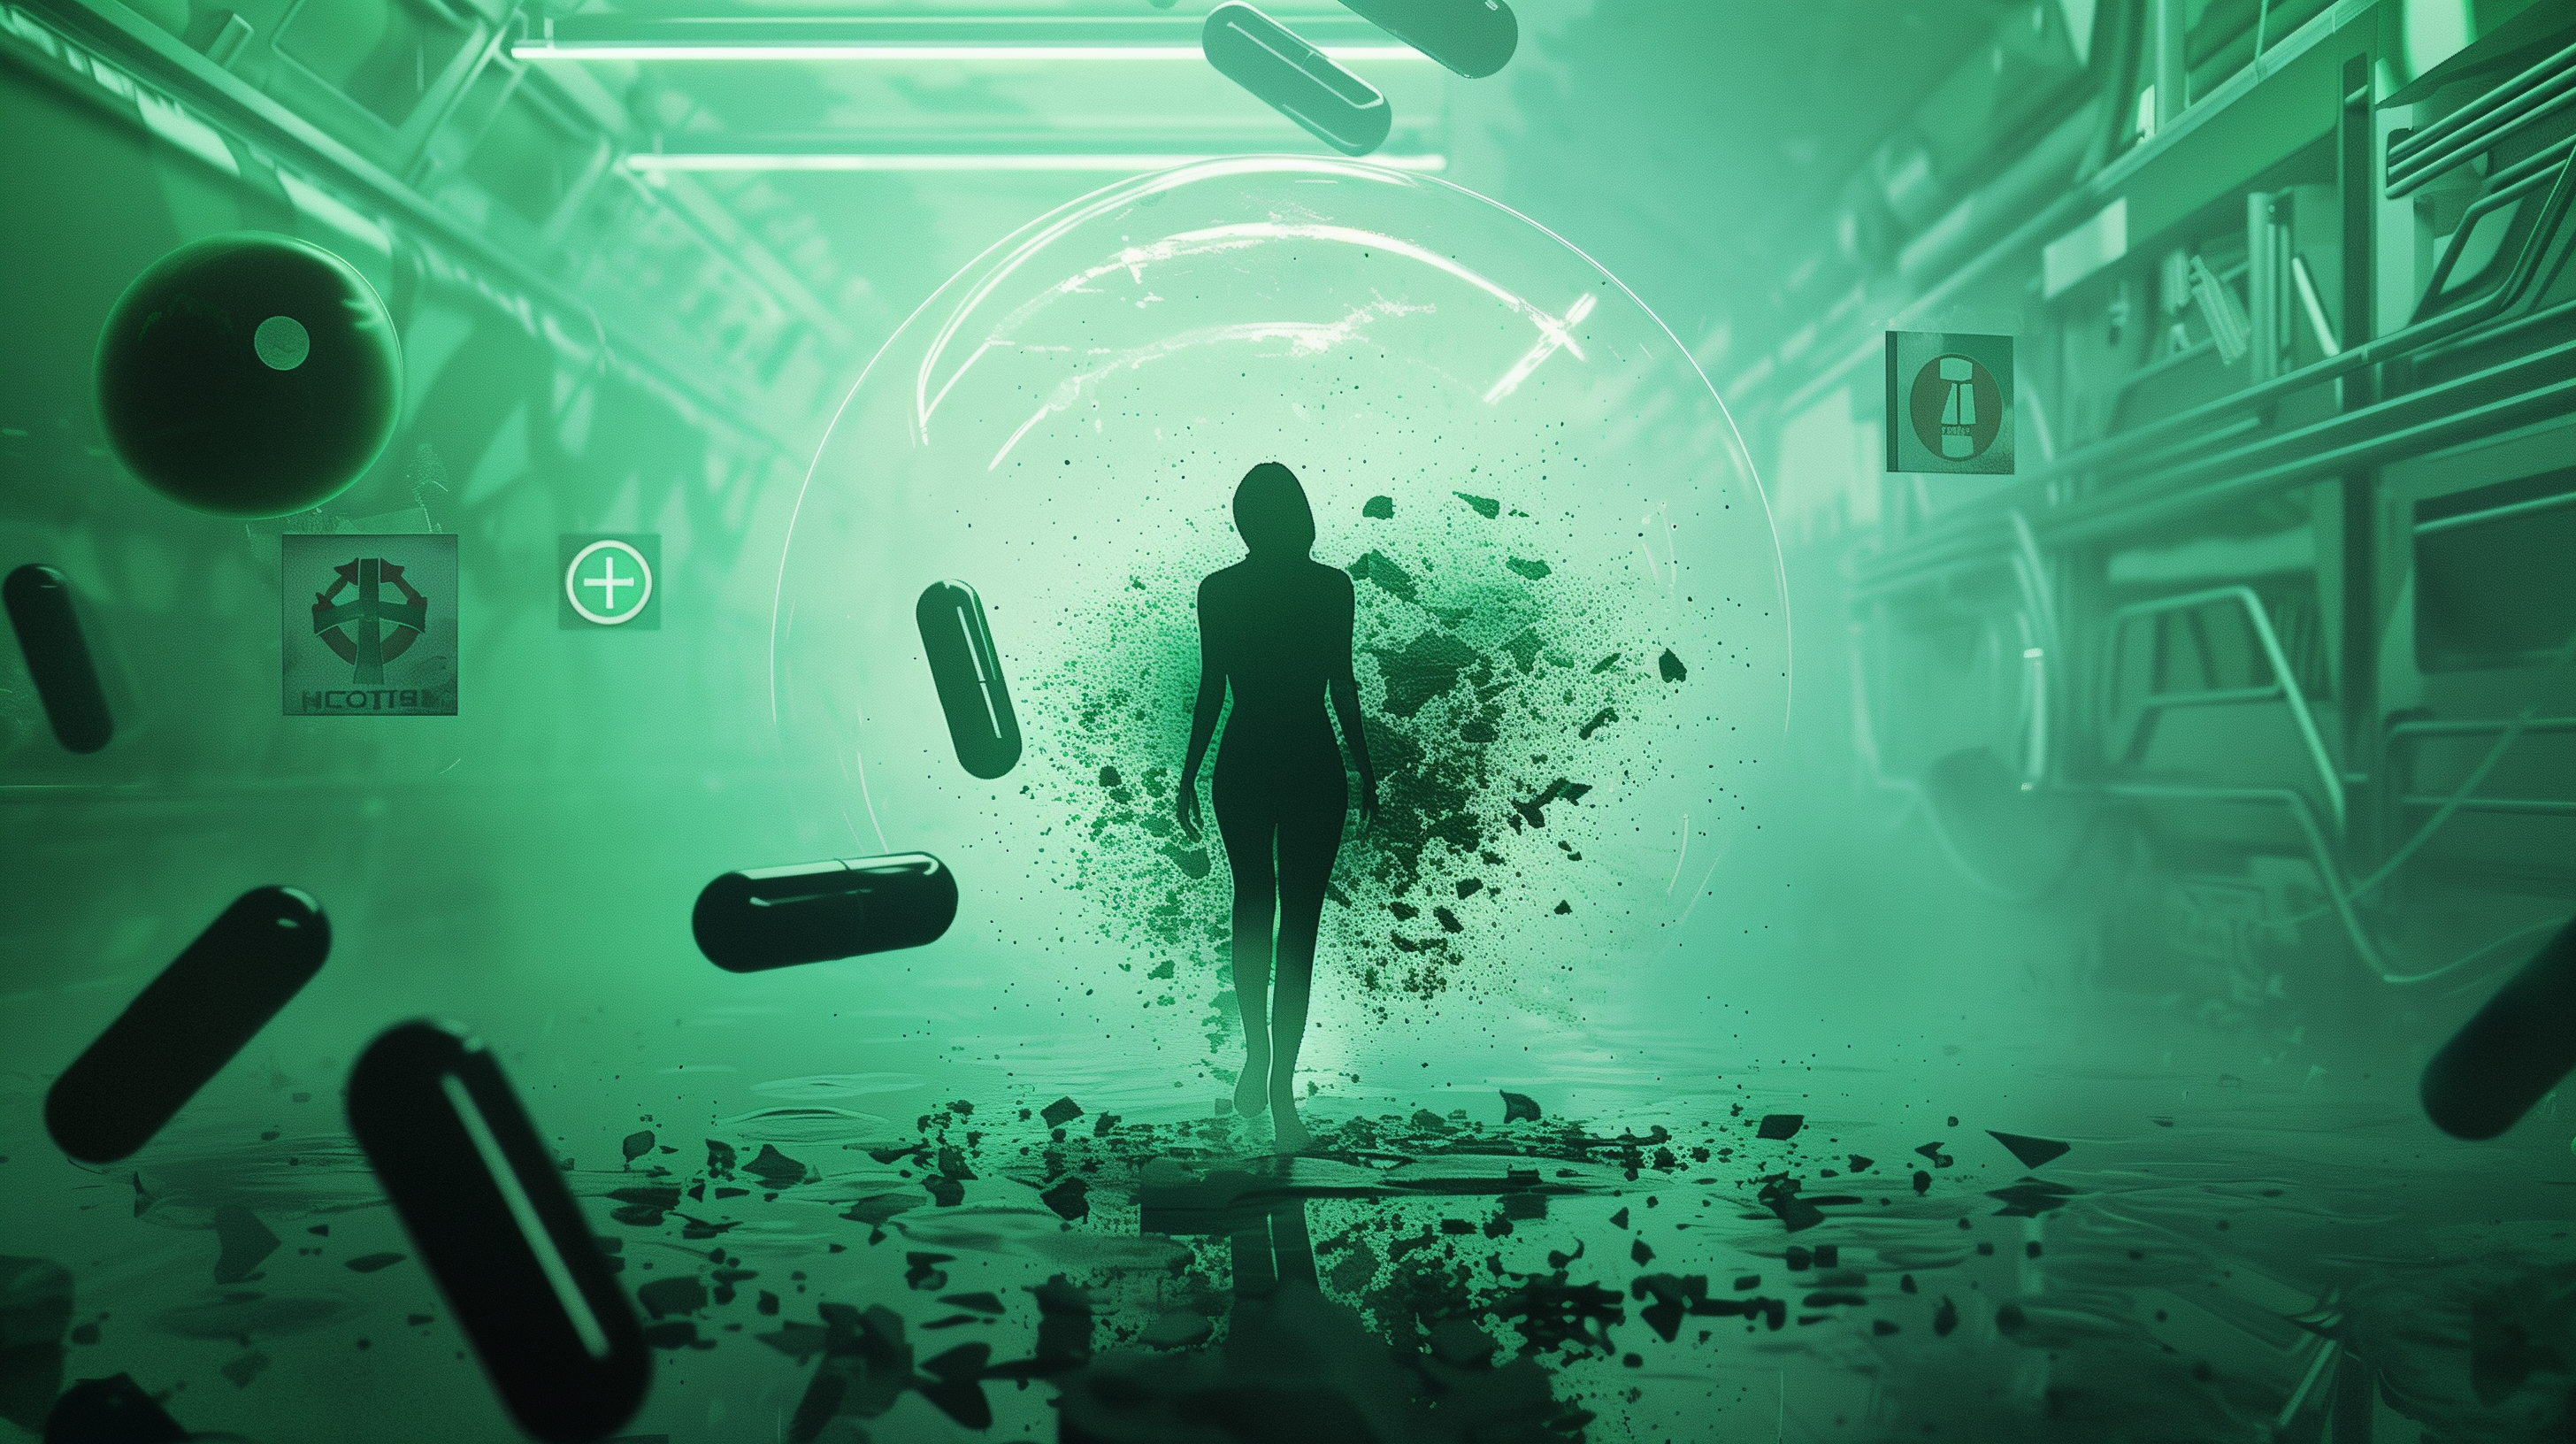 broken capsule with green powder spilling out, surrounded by caution symbols, against a backdrop of a human silhouette